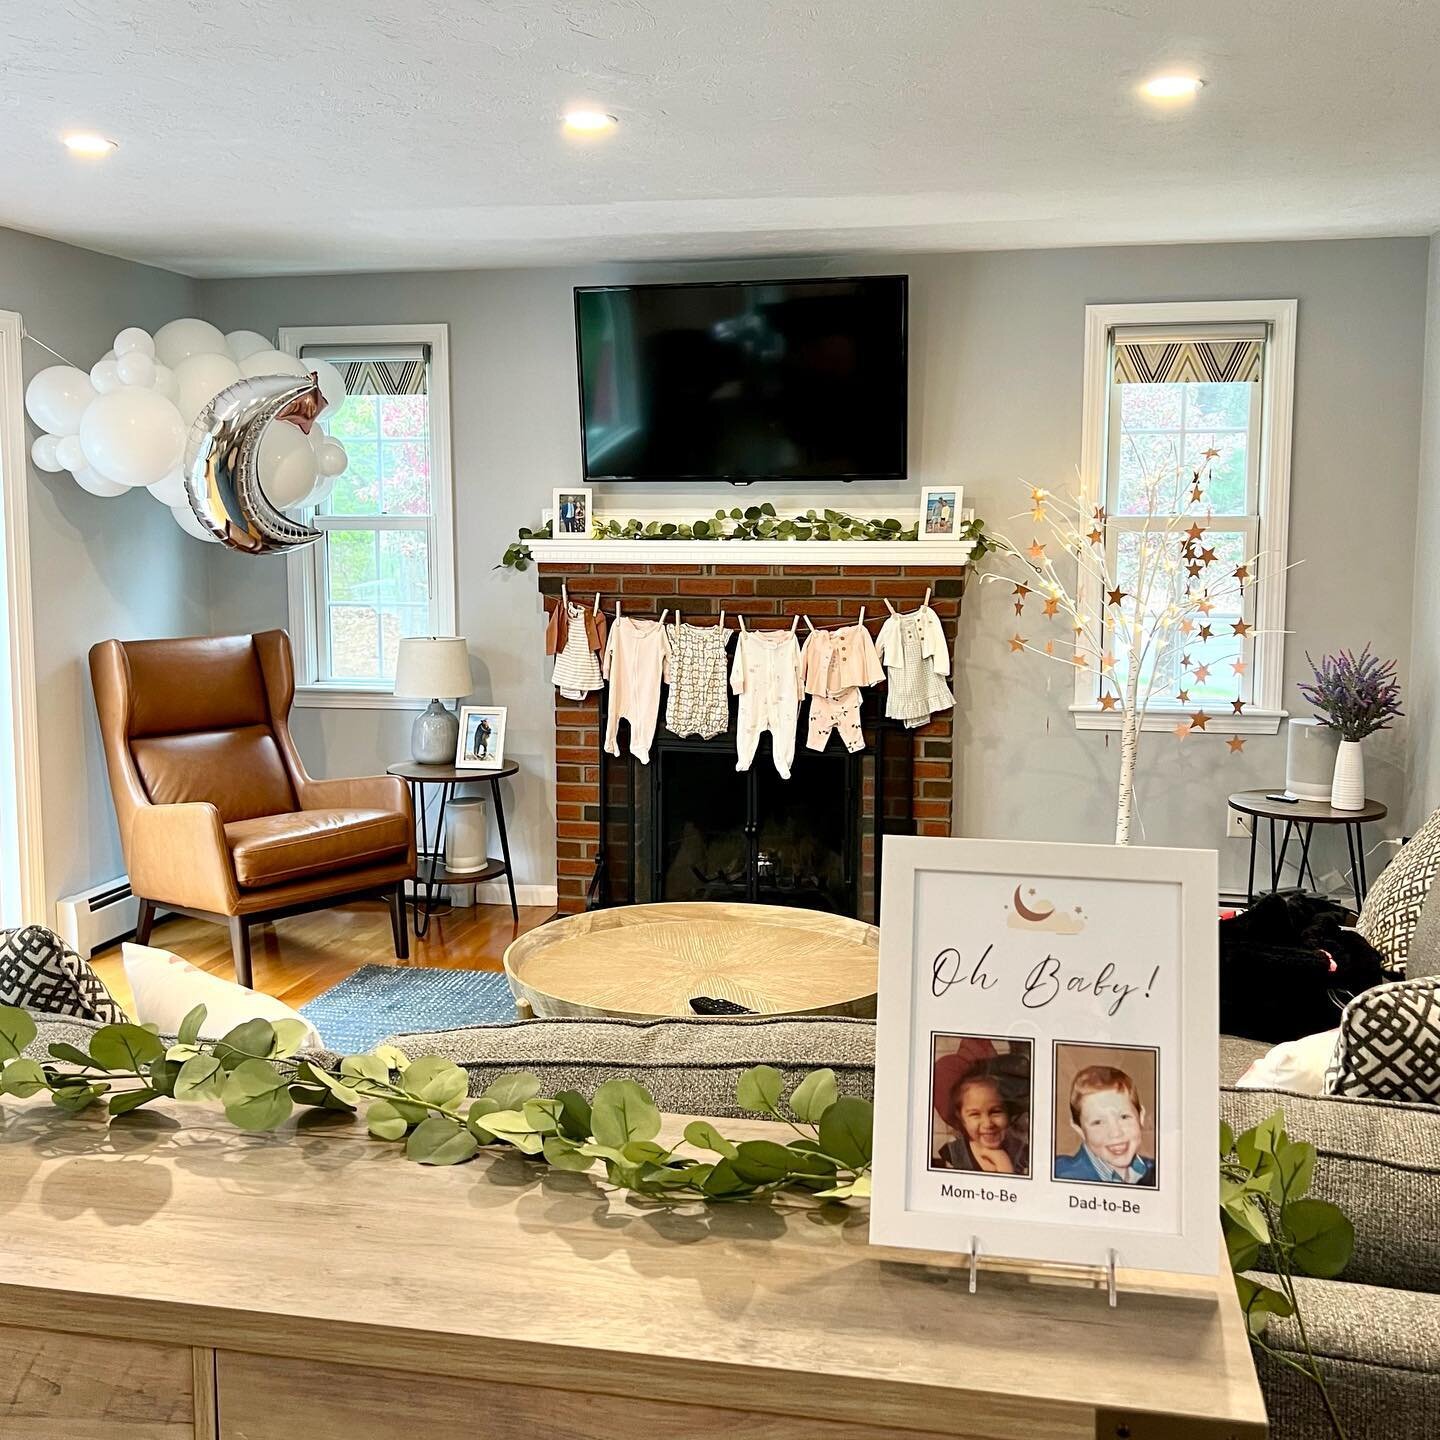 &lsquo;Over the Moon&rsquo; with how this special celestial-themed baby shower came together. 
😍😍😍 

Swipe to see the glowing cloud centerpieces on slide two ➡️ ☁️💕